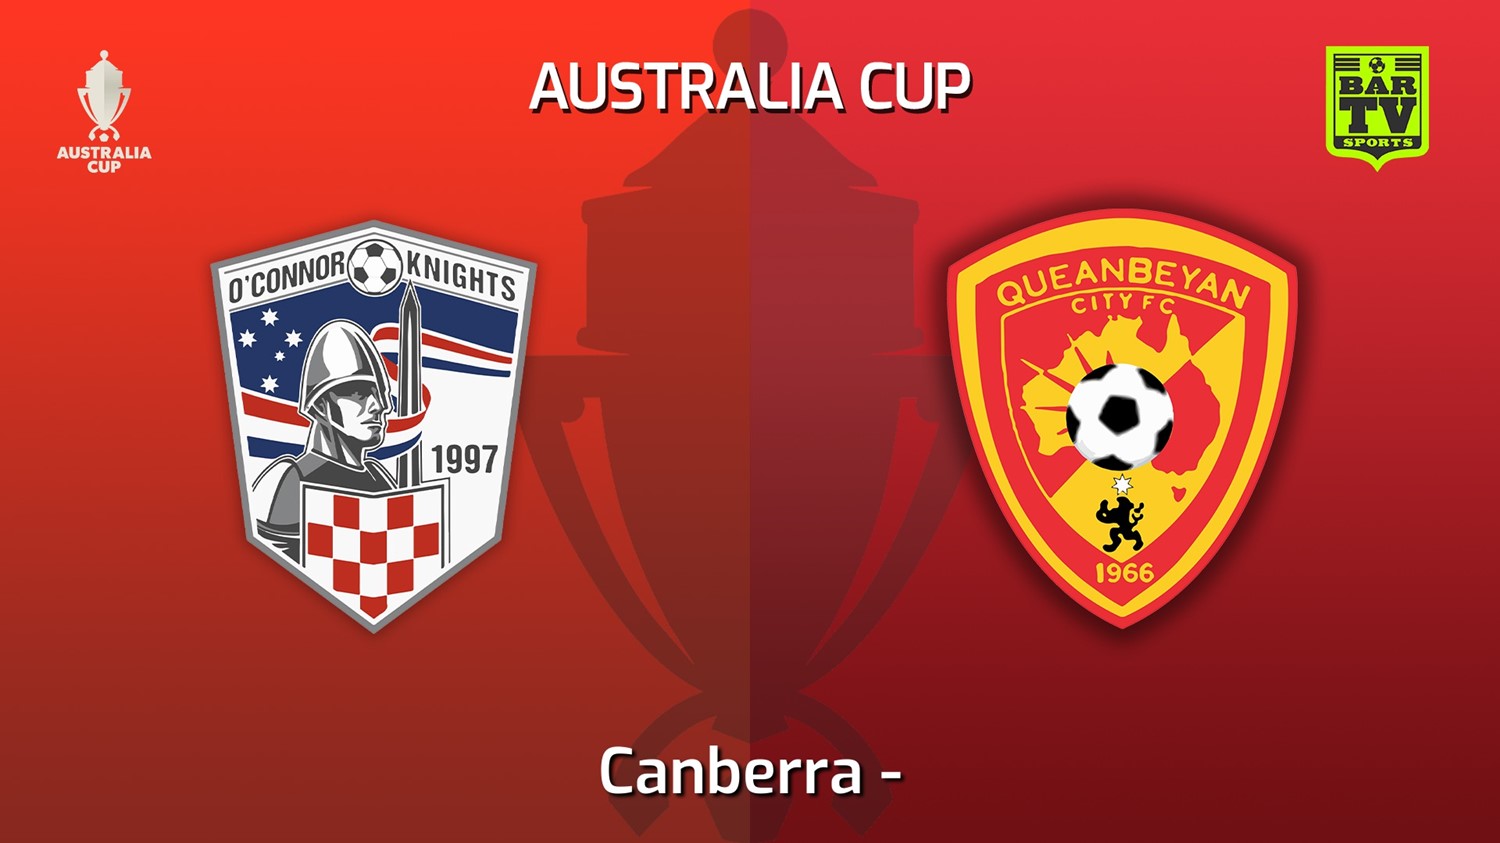 220511-Australia Cup Qualifying Canberra O'Connor Knights SC v Queanbeyan City SC Slate Image